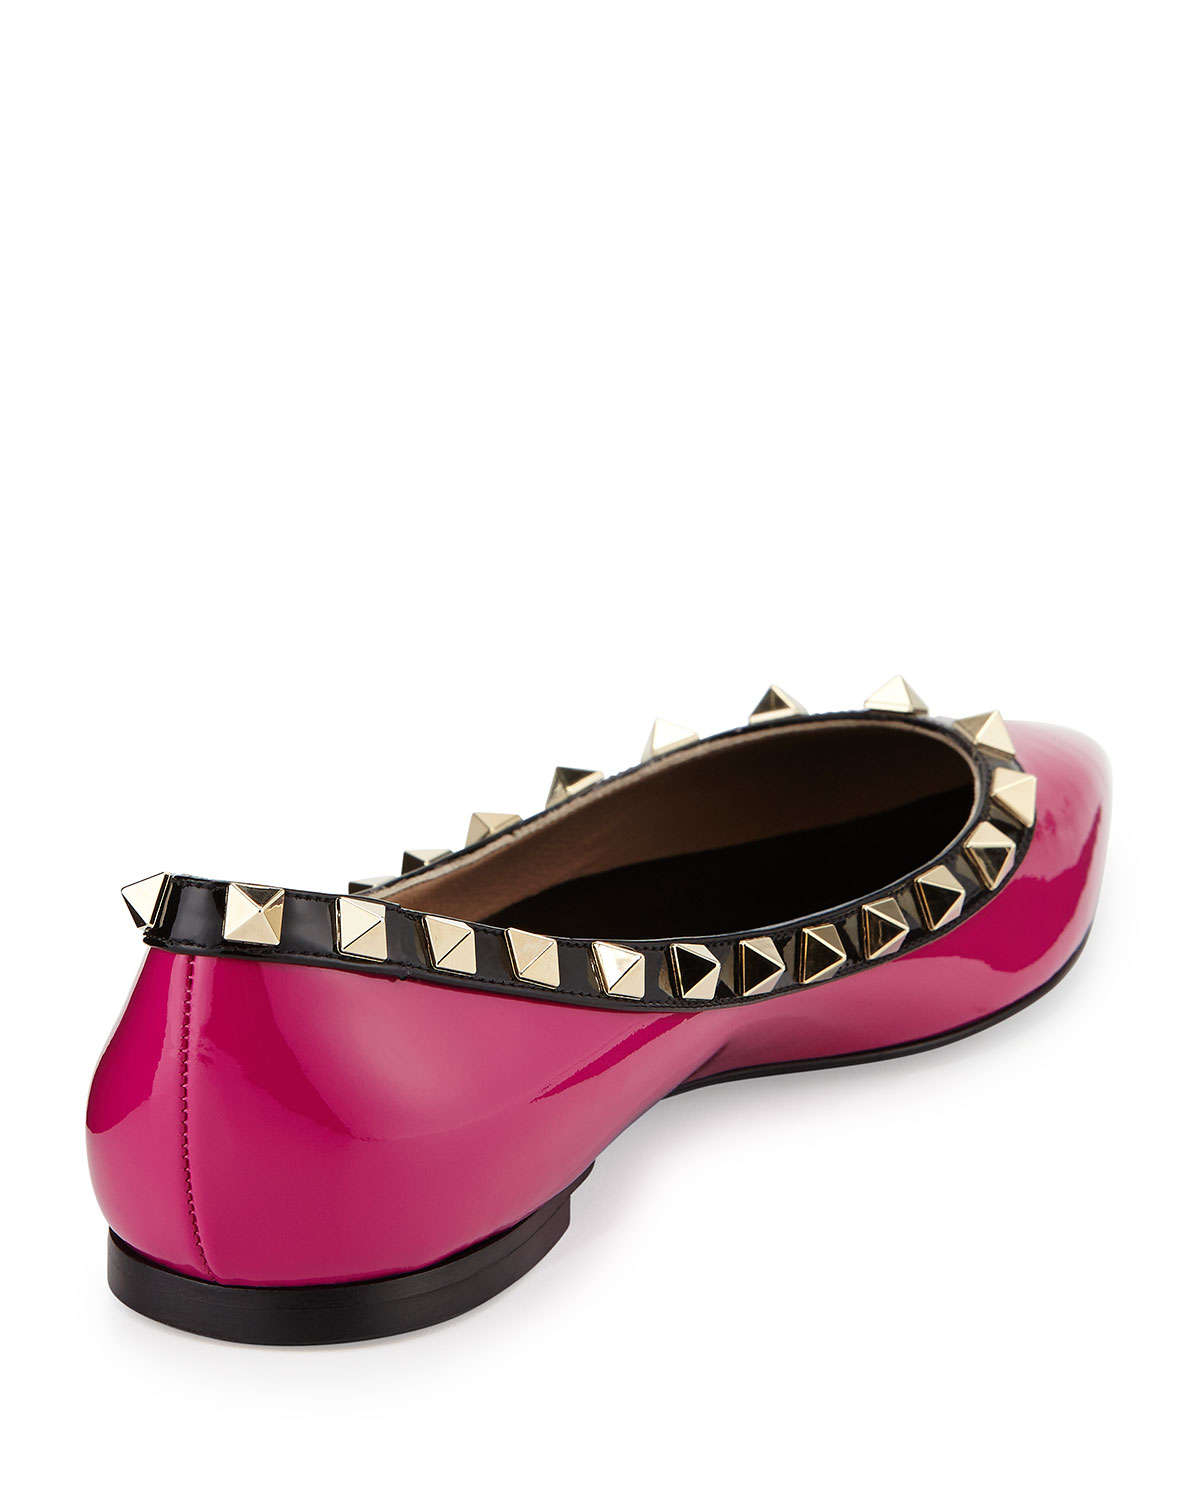 Lyst - Valentino Rockstud Leather Ballet Flats in Pink